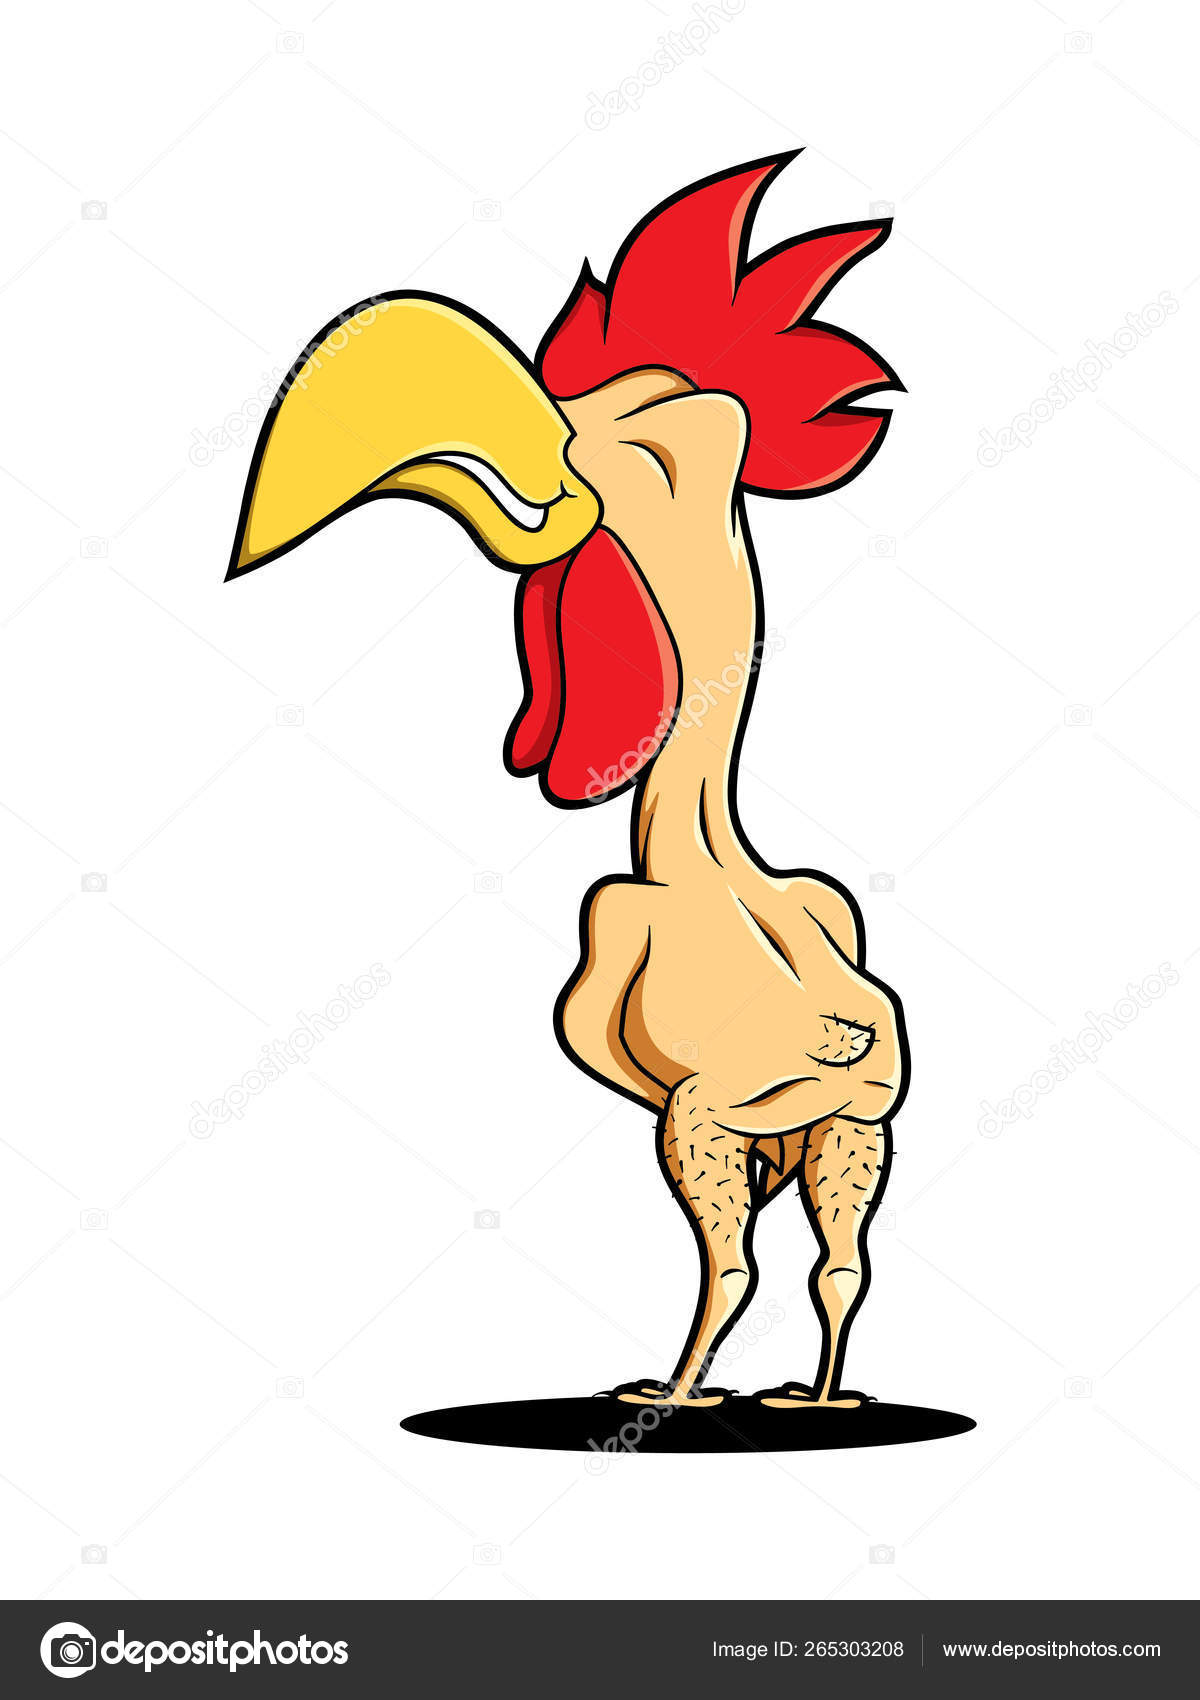 Cartoon Crazy Gallery Nude - Funny Naked Rooster Cock Chicken Logo Food Farm Industry Restaurant Stock  Vector Image by Â©Vectalex #265303208